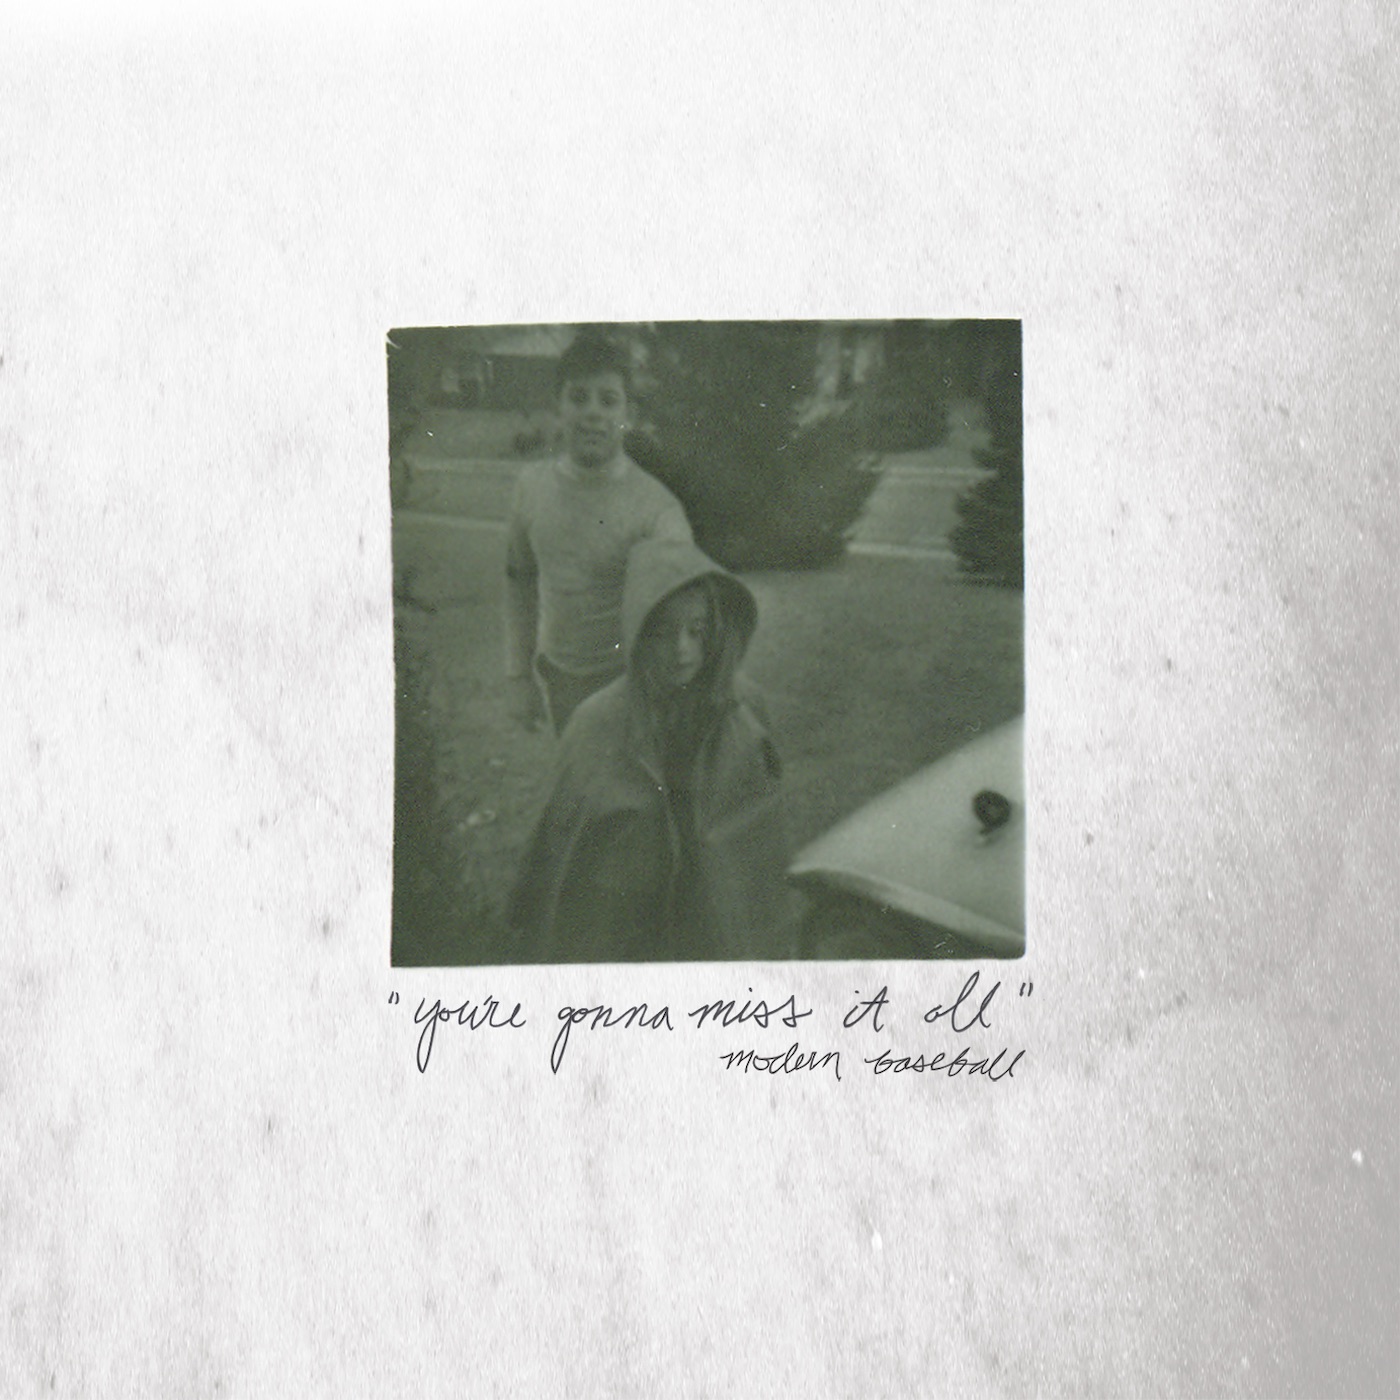 You're Gonna Miss It All by Modern Baseball